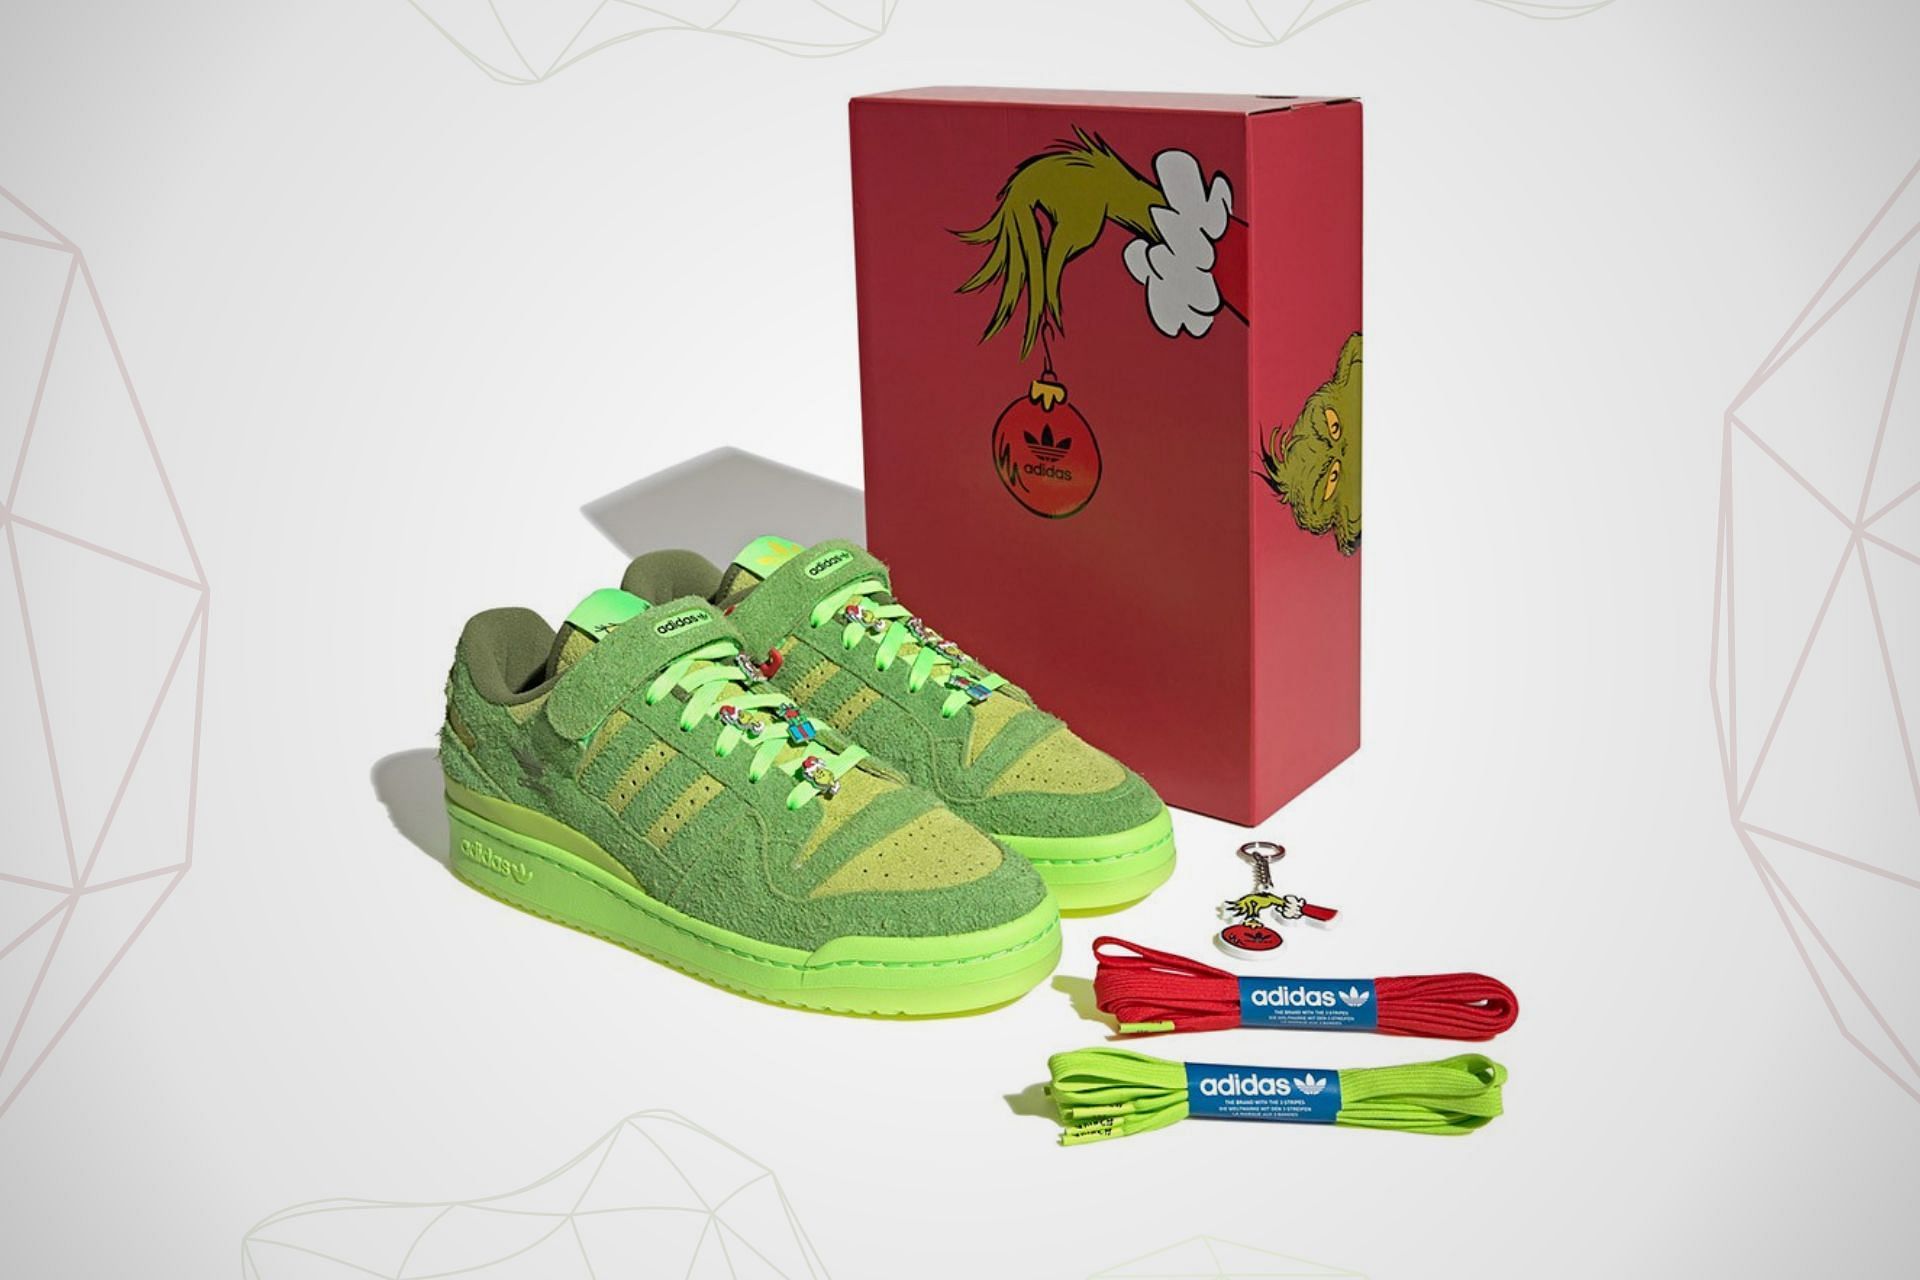 Where to buy The Grinch x Adidas Forum Low? Price, release date, and